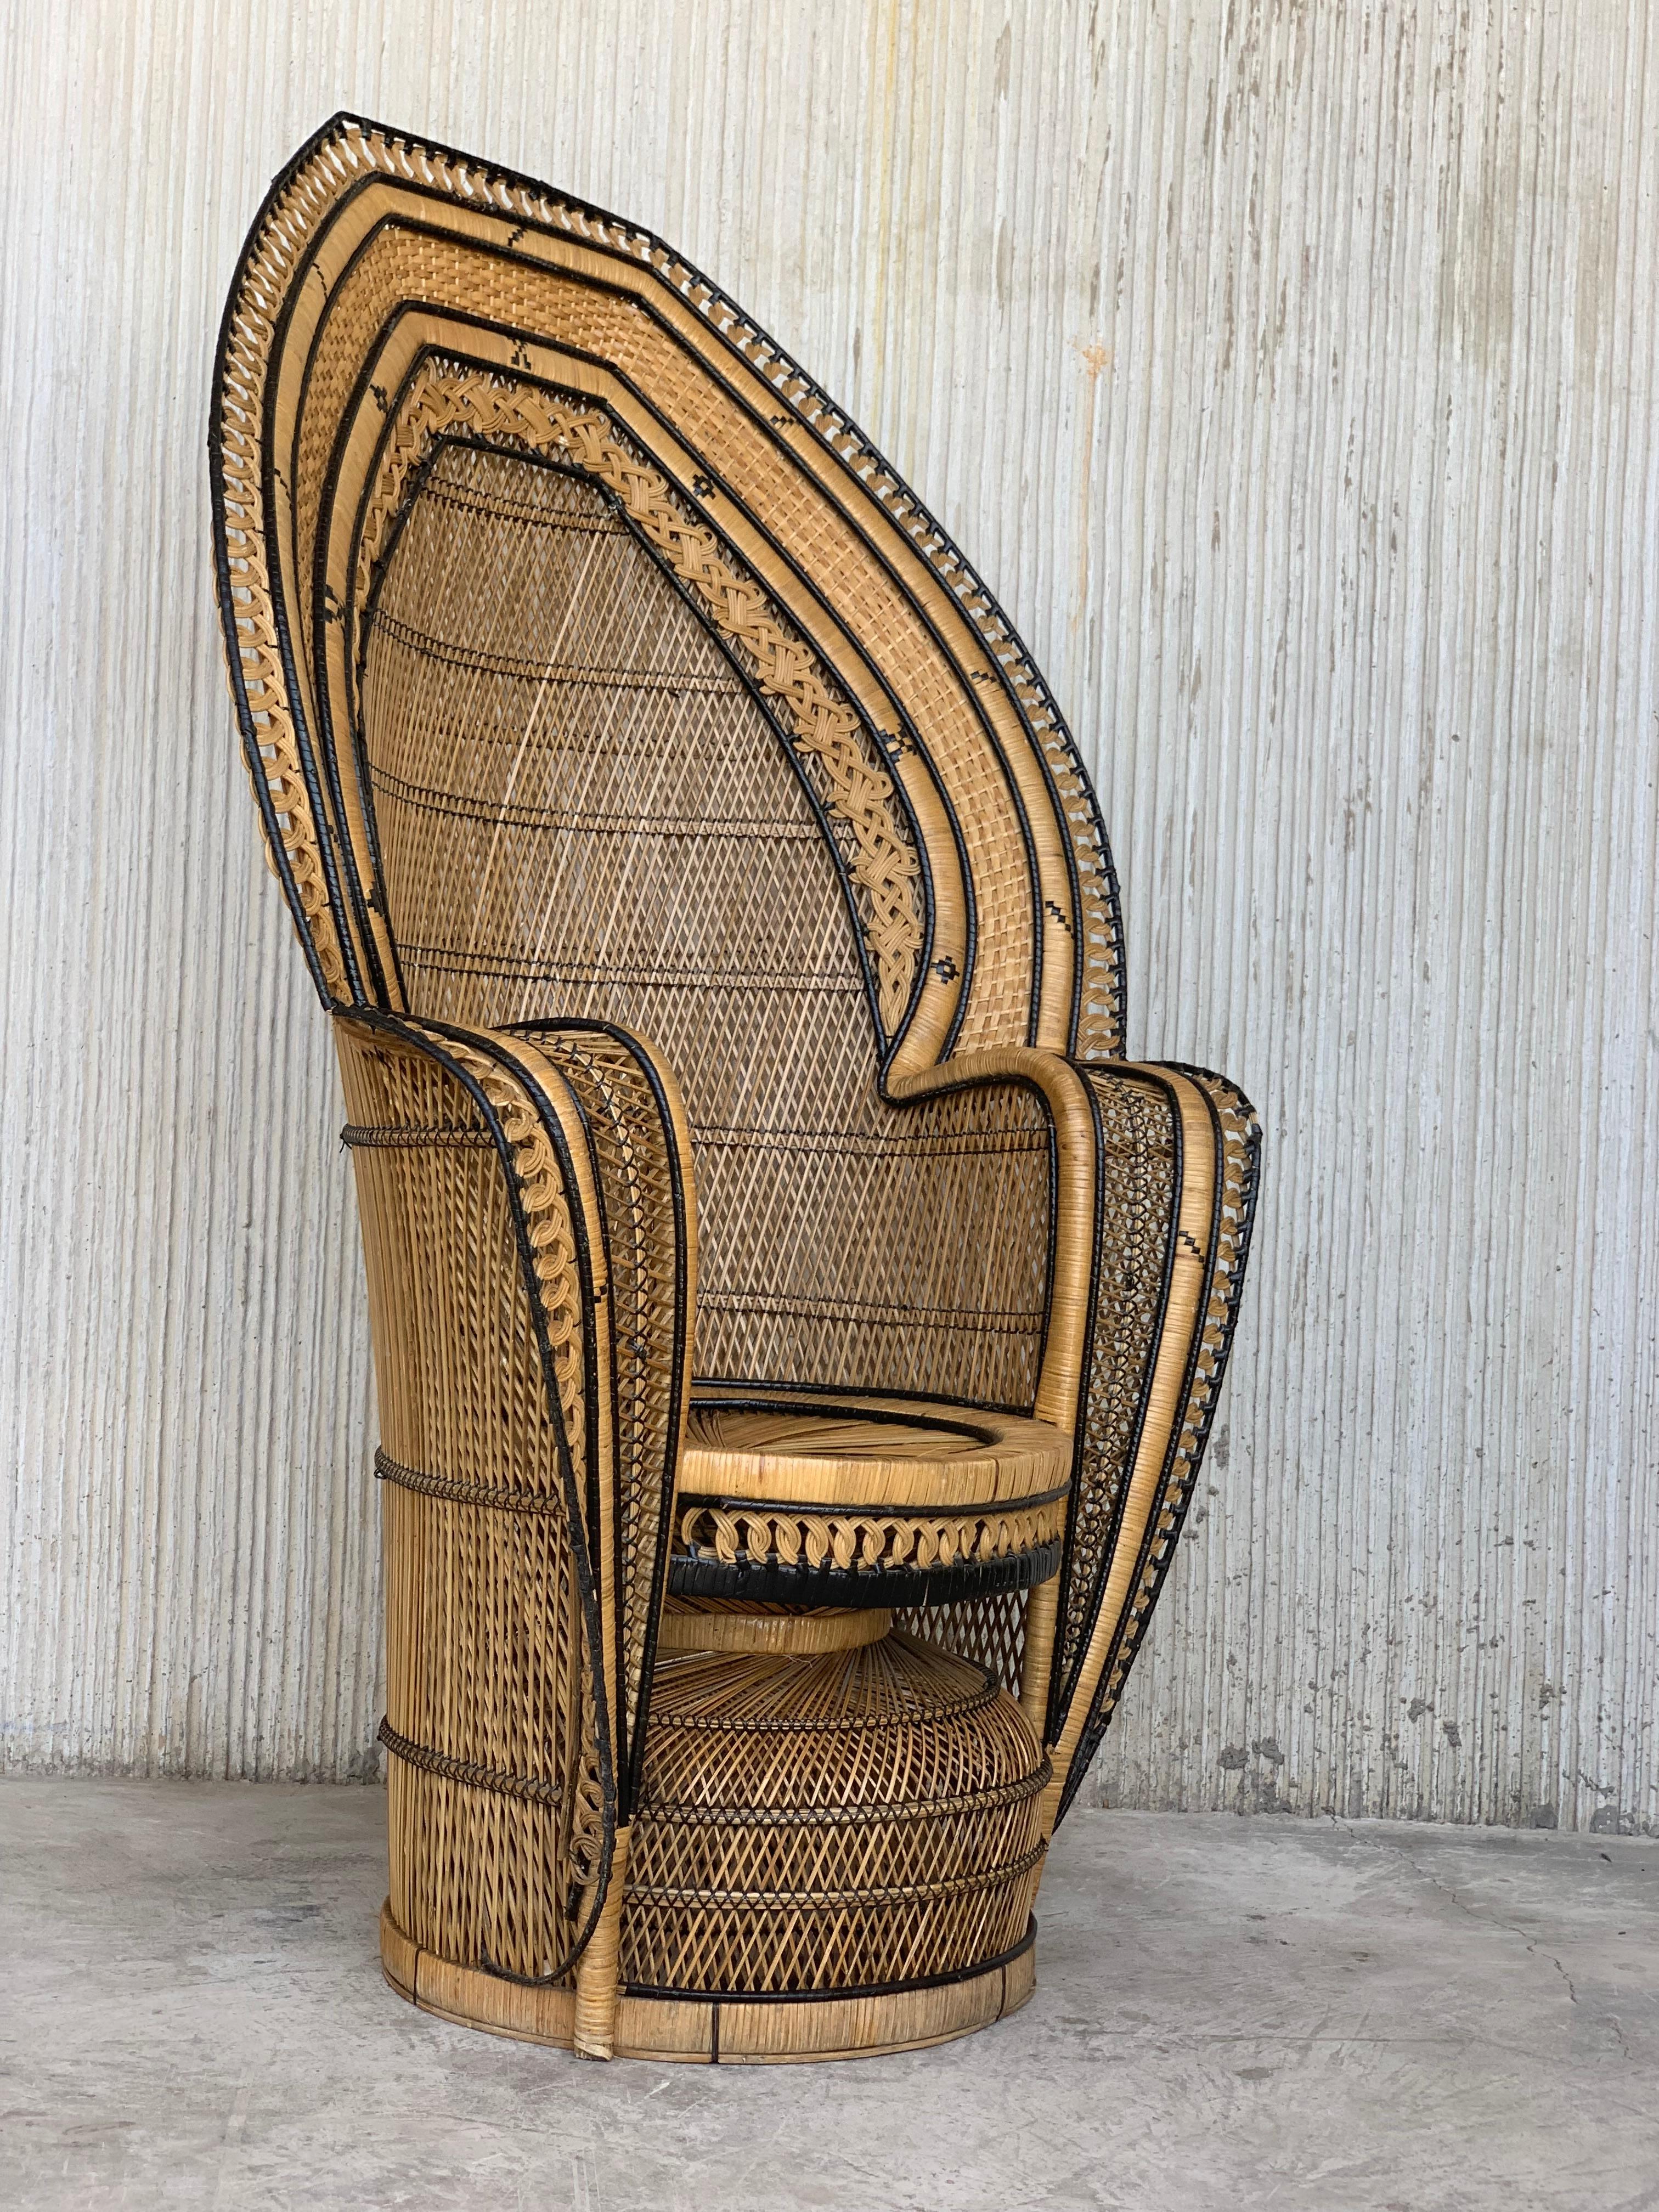 20th Century Vintage Handcrafted Wicker, Rattan and Reed Peacock Chair